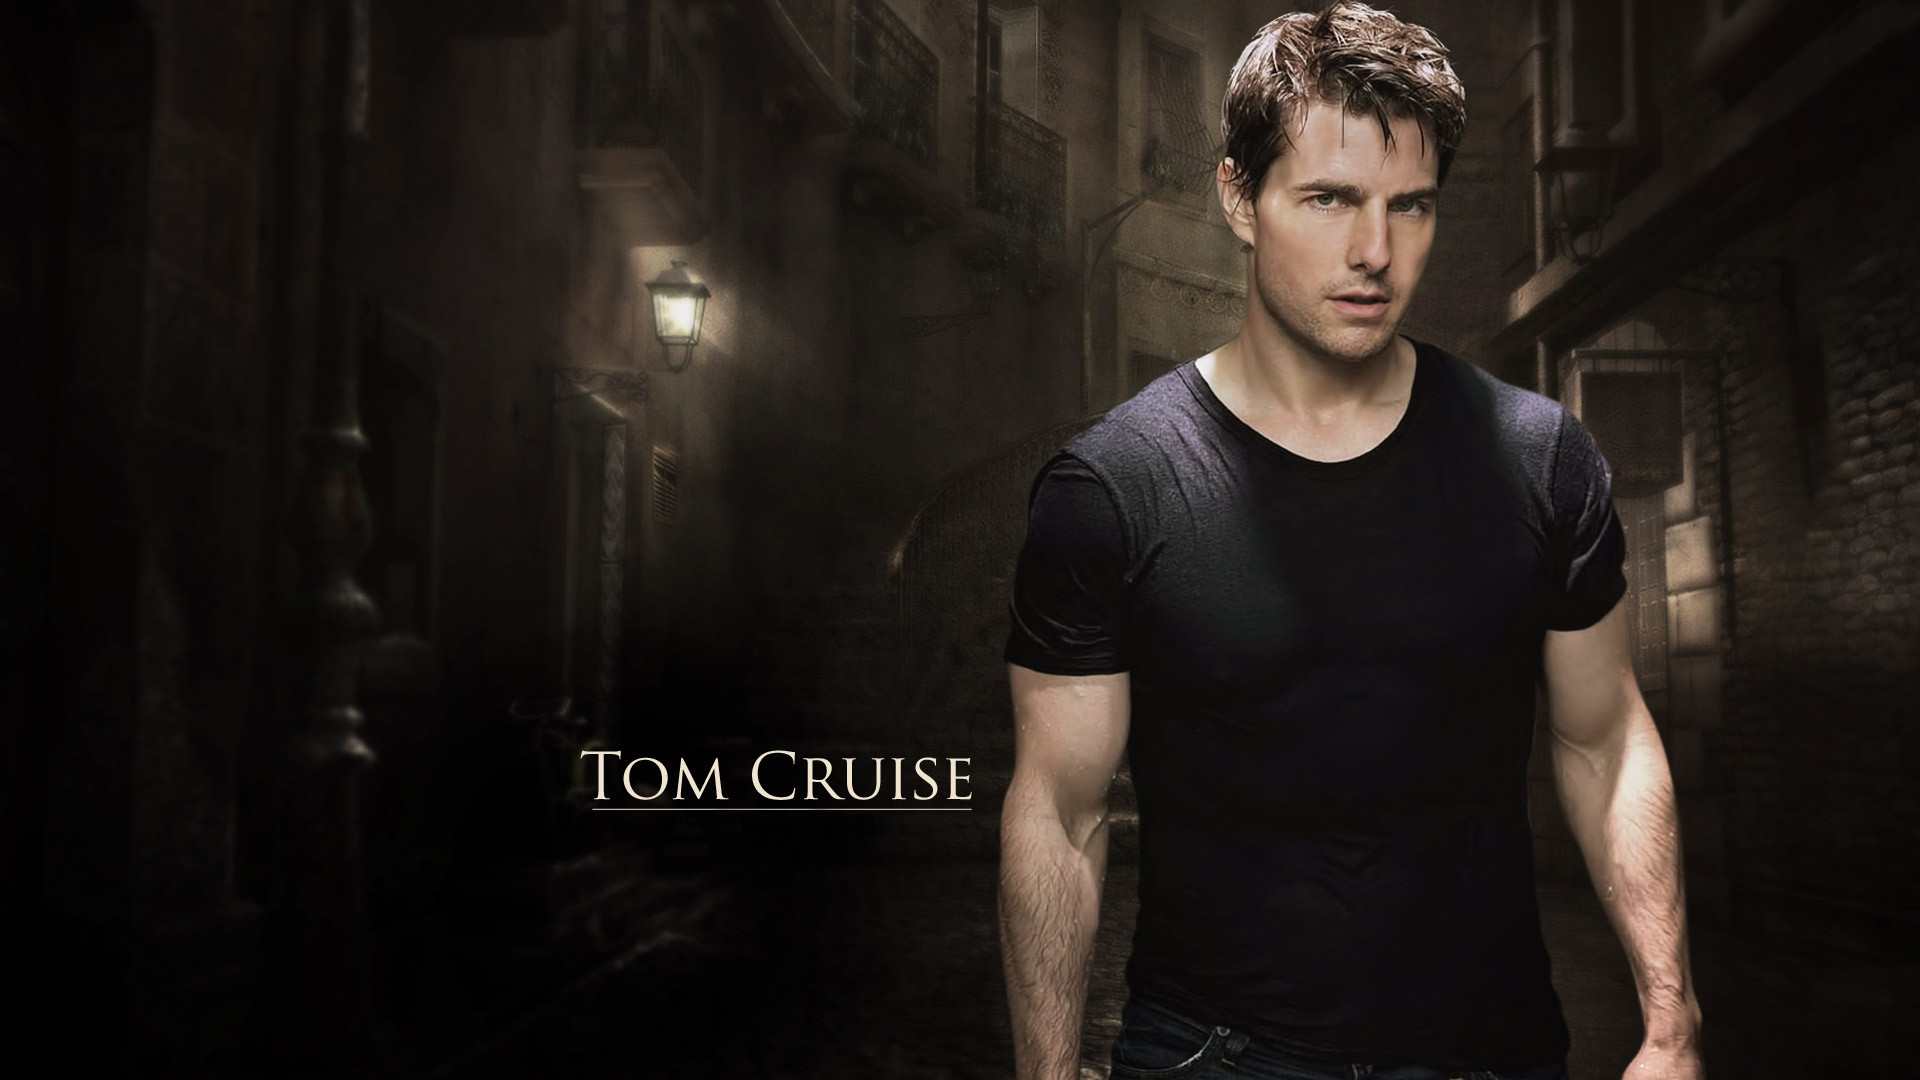 1920x1080 Search Results for “tom cruise wallpapers” – Adorable Wallpapers